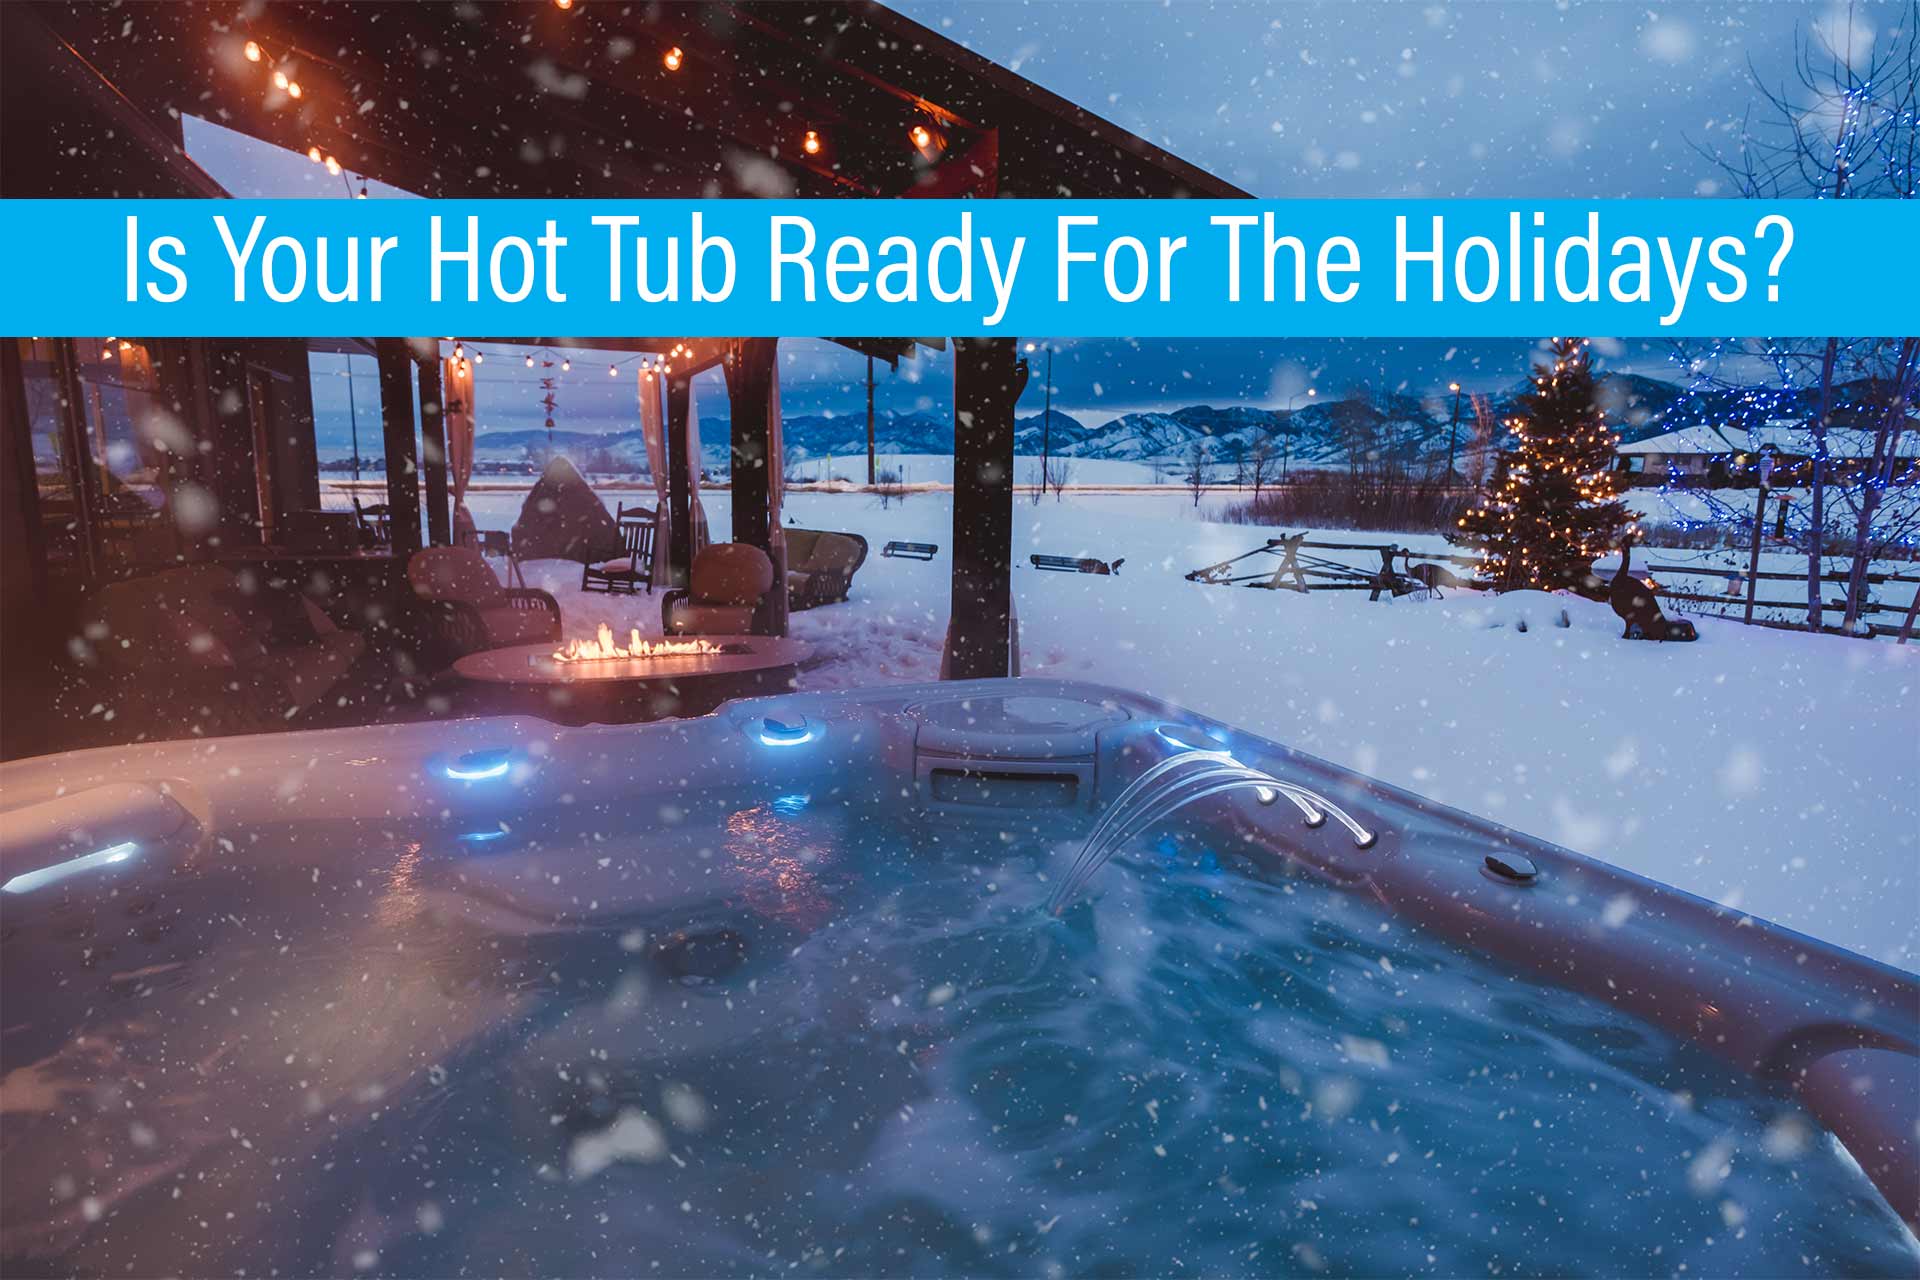 Is Your Hot Tub Ready for the Holidays?